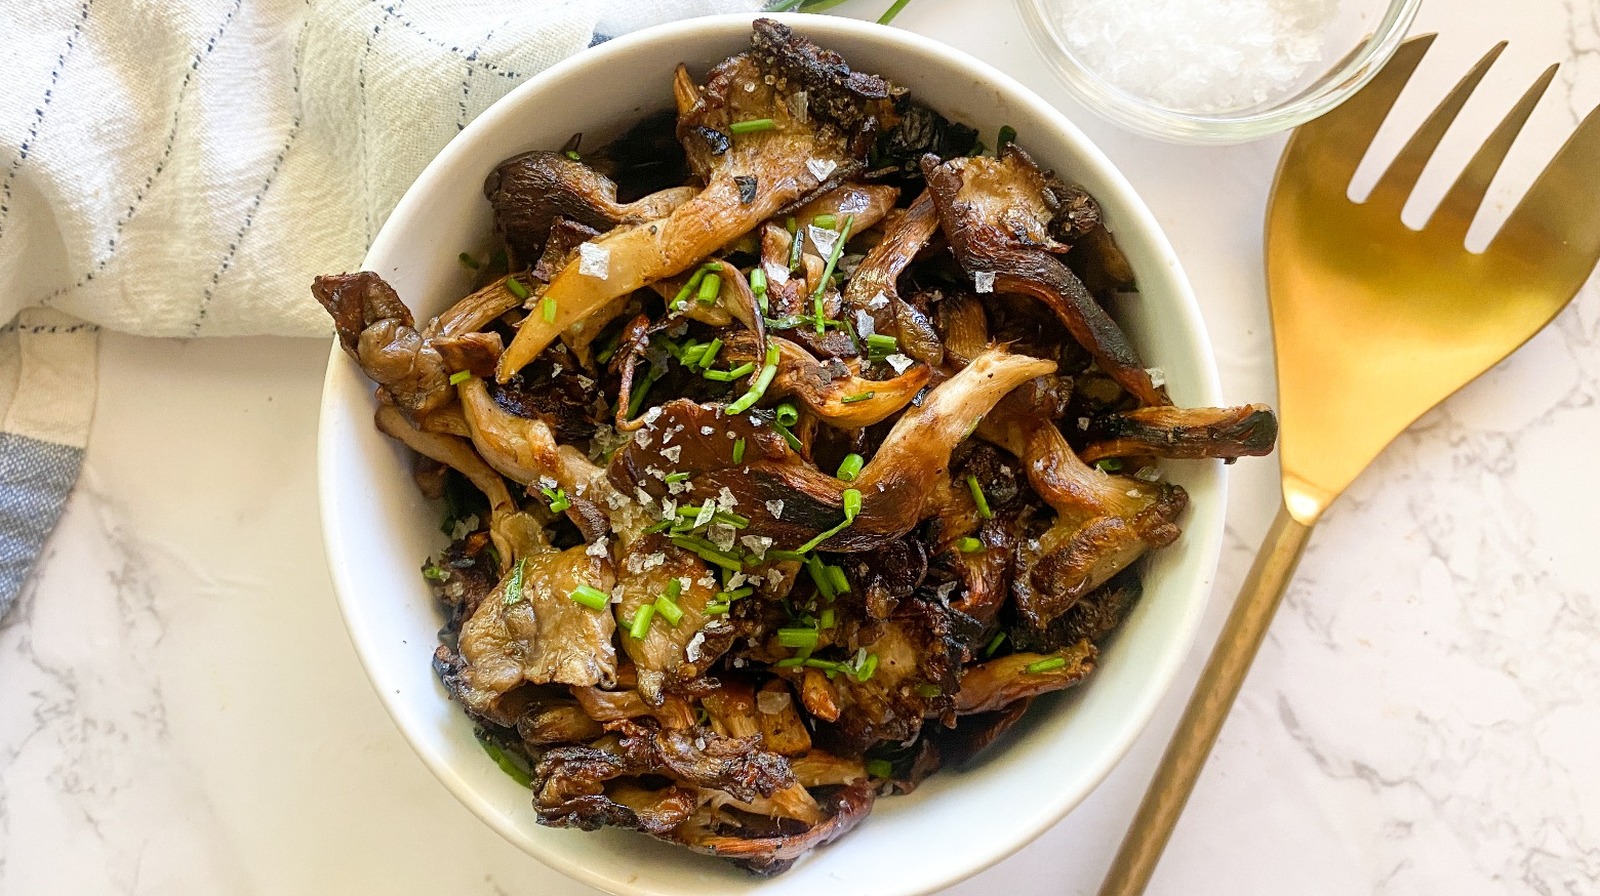 Pan-Fried Oyster Mushrooms - This Healthy Table